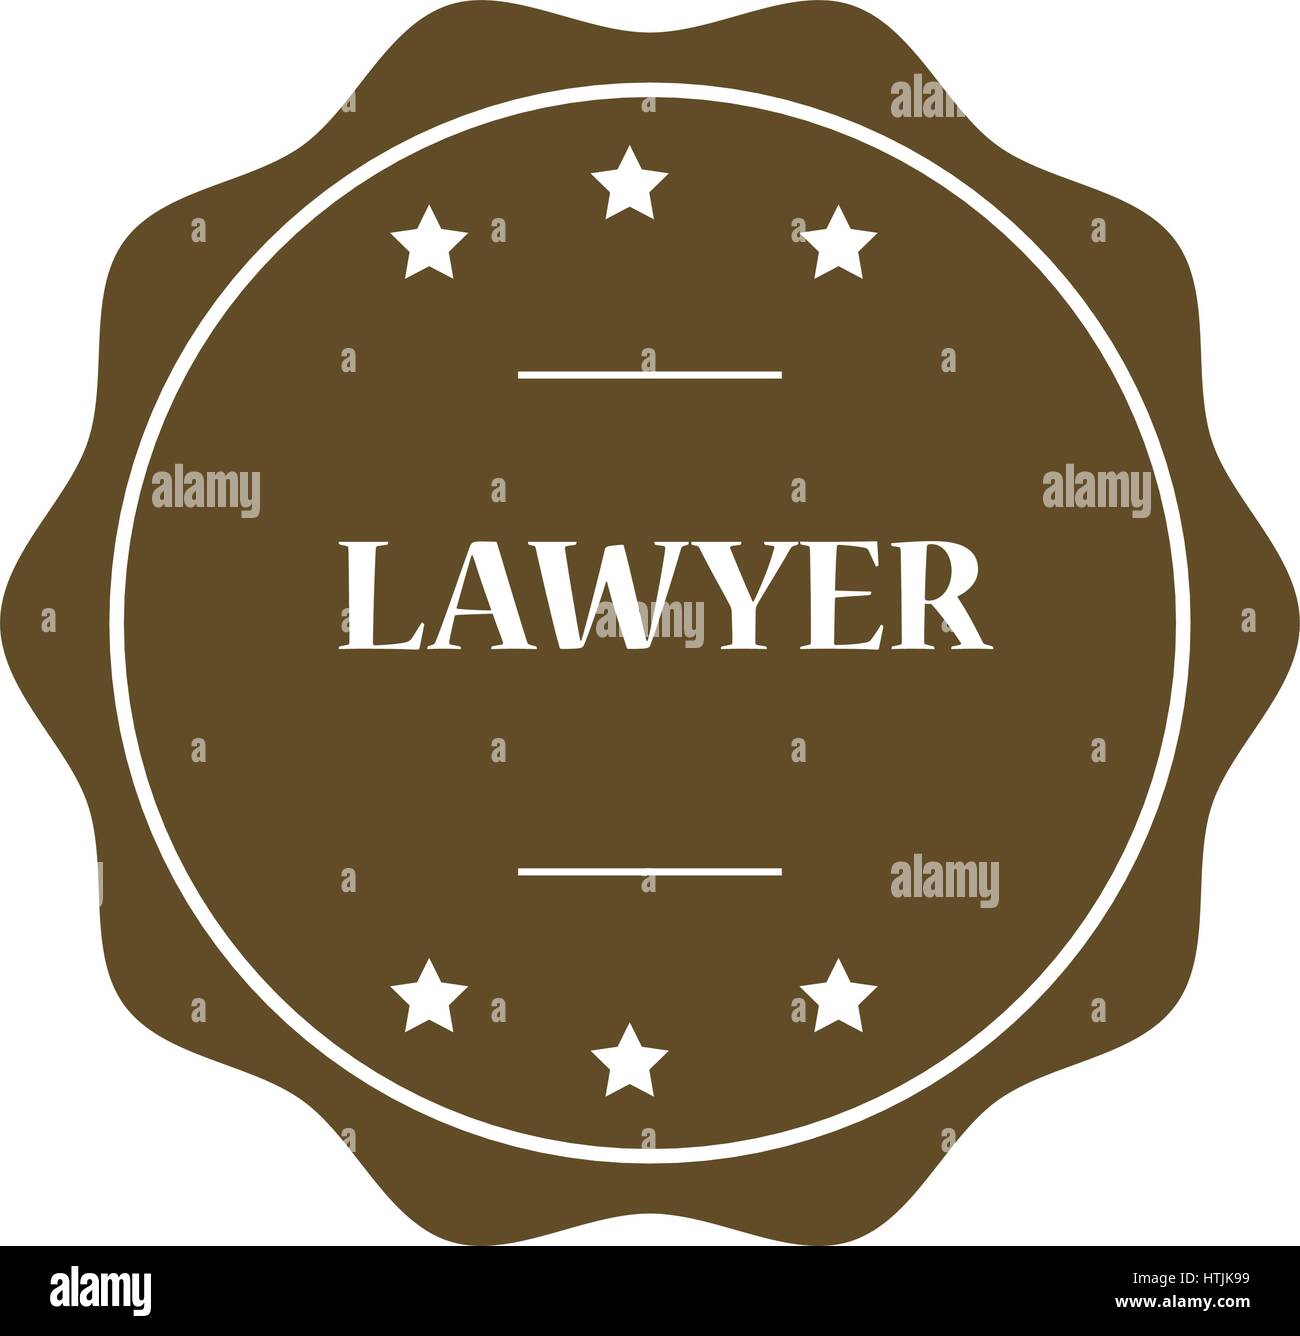 Lawyer Stock Vector Images - Alamy